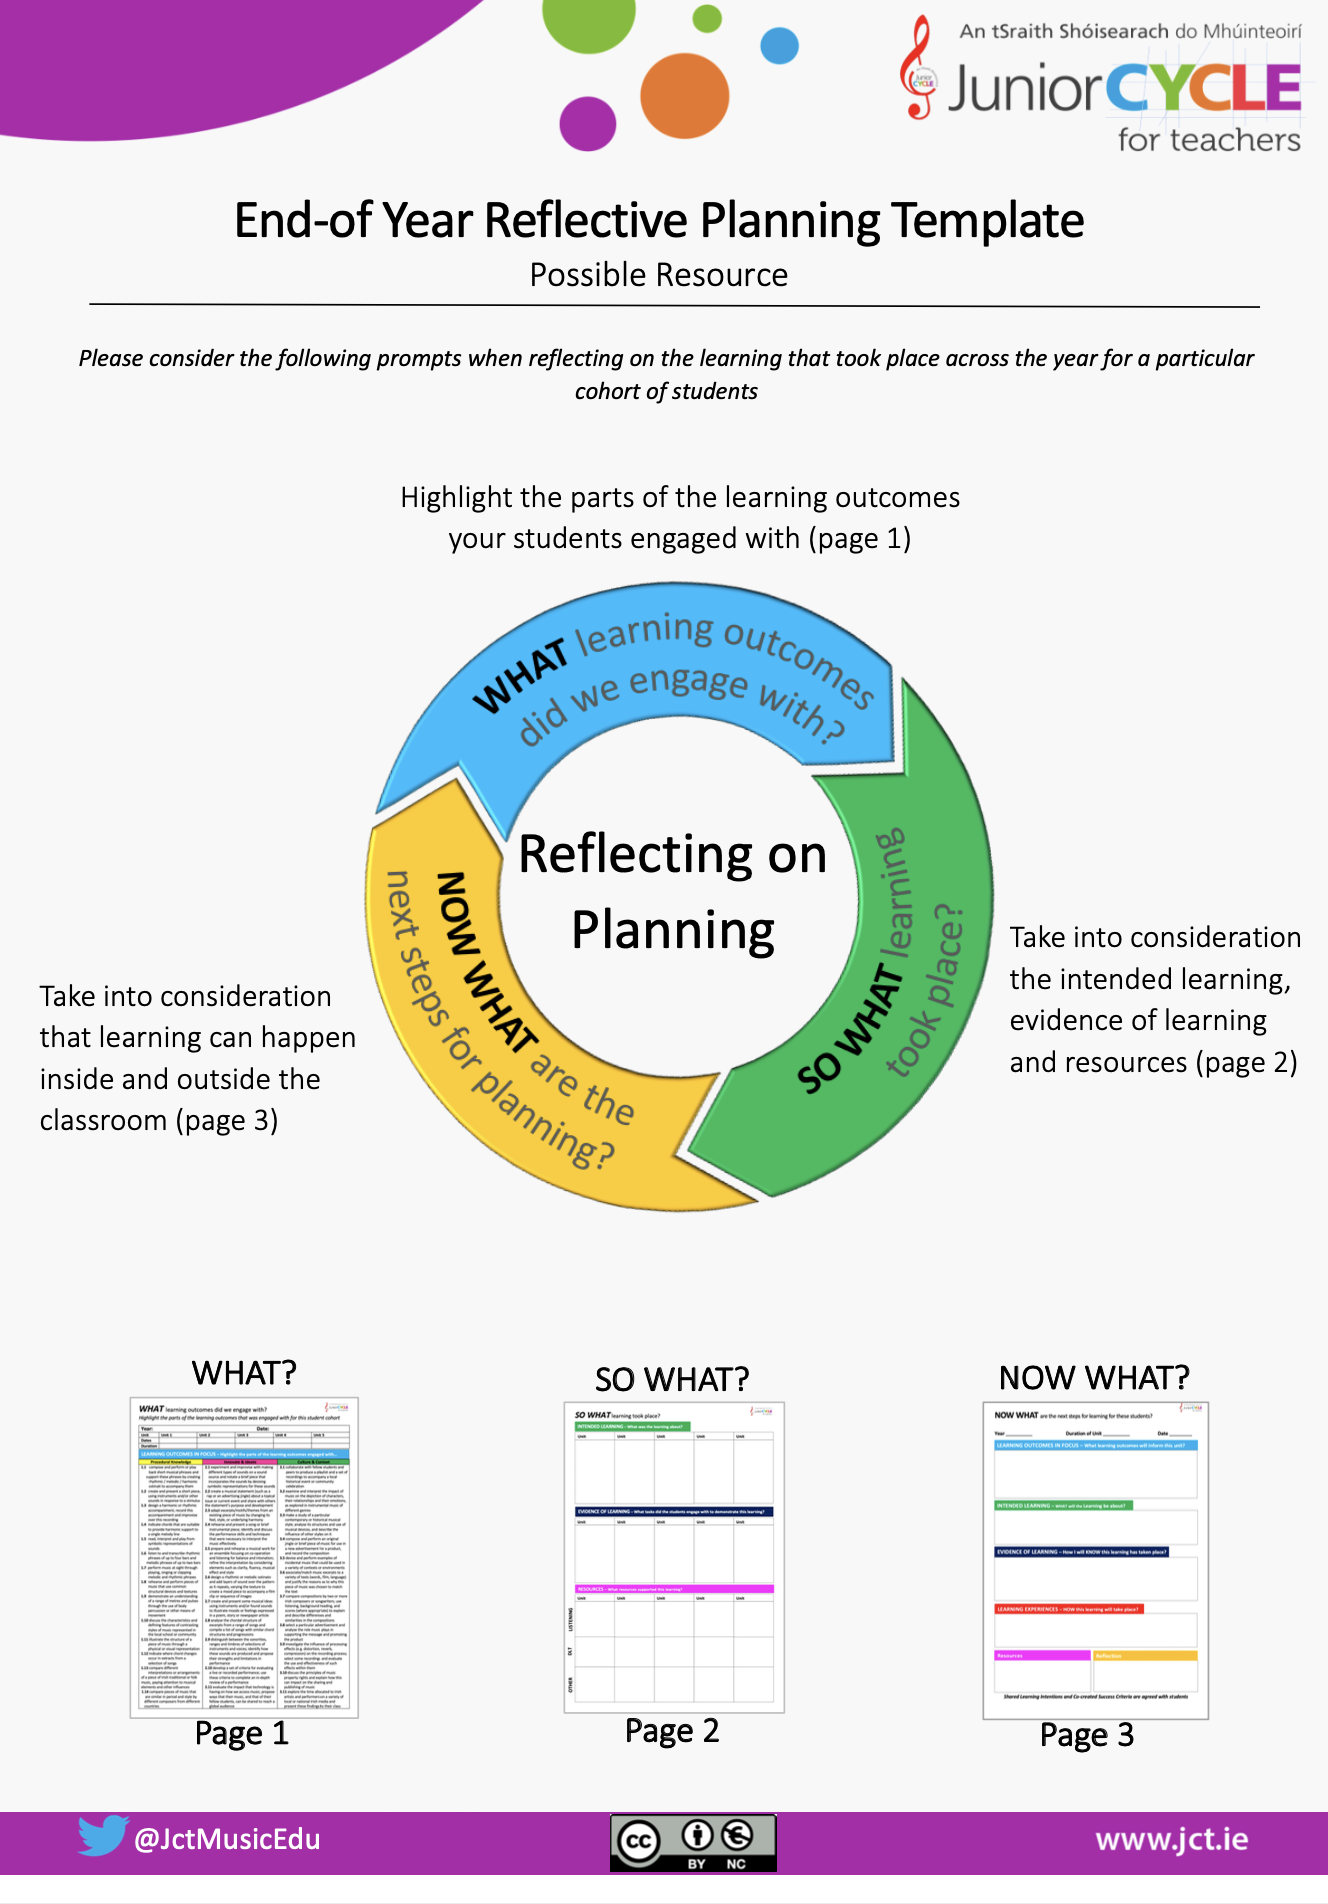 Reflective Planning Template EDITABLE